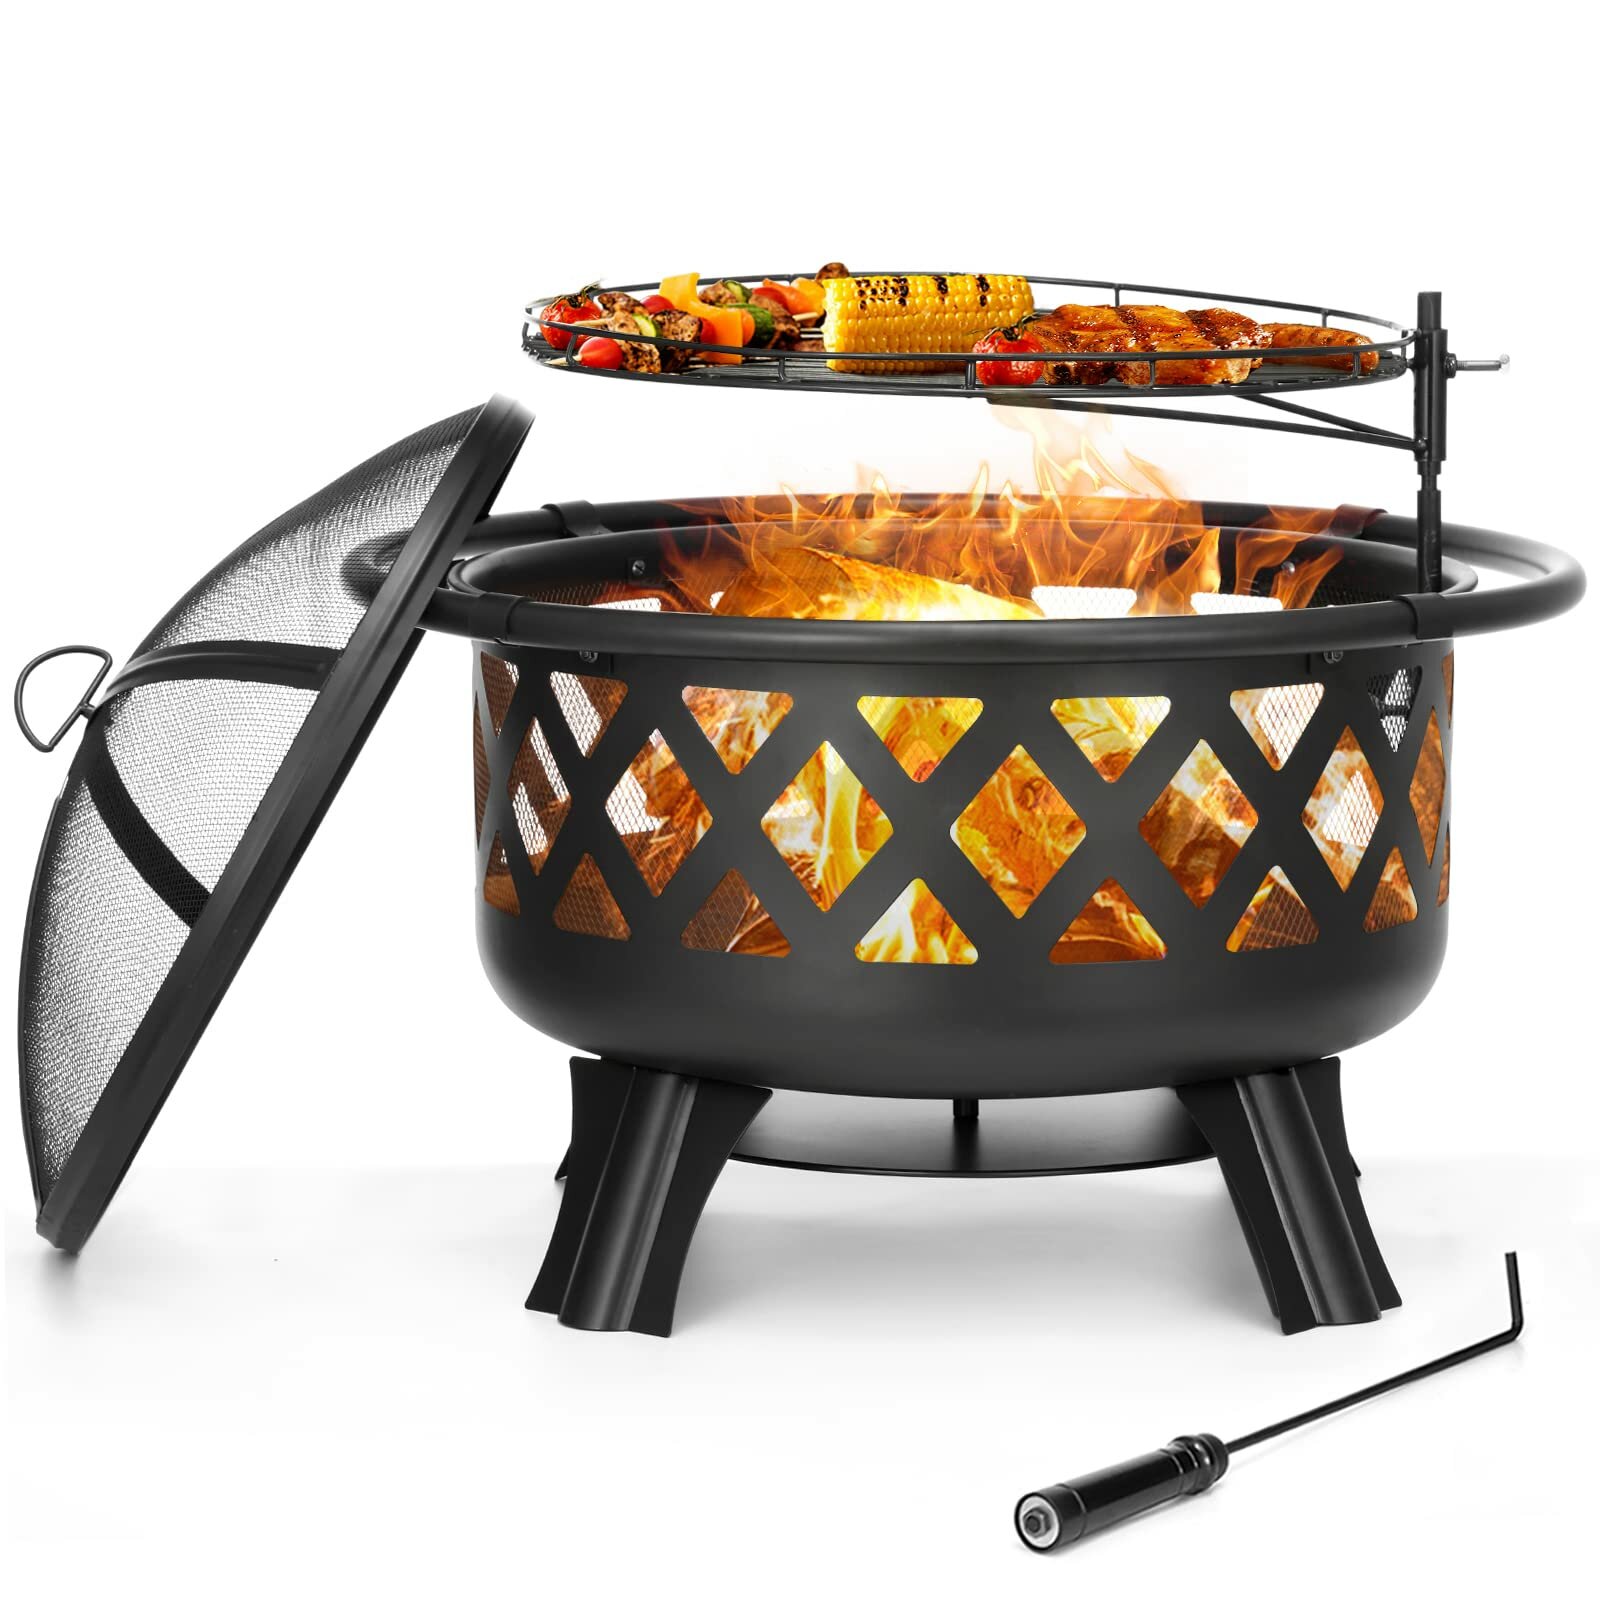 

SINGLYFIRE 30 Inch Fire Pit for Outside with Grill Outdoor Wood Burning Firepit Large Steel Firepit Bowl for Patio Backy